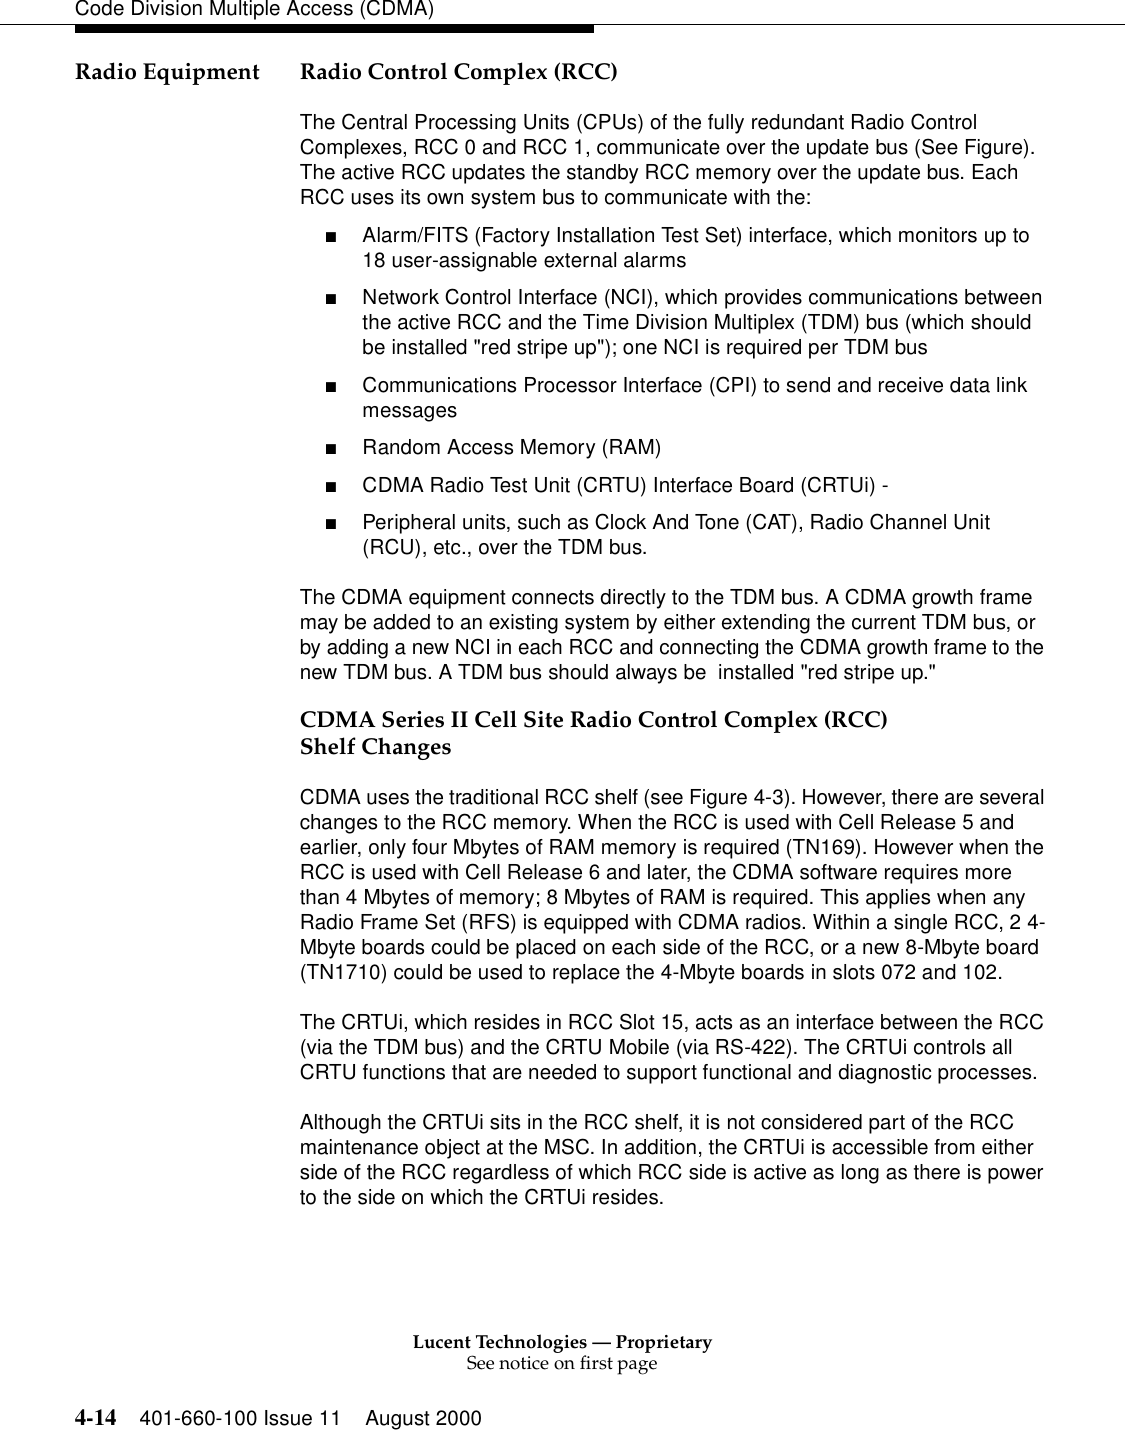 Lucent Technologies — ProprietarySee notice on first page4-14 401-660-100 Issue 11 August 2000Code Division Multiple Access (CDMA)Radio Equipment Radio Control Complex (RCC)The Central Processing Units (CPUs) of the fully redundant Radio Control Complexes, RCC 0 and RCC 1, communicate over the update bus (See Figure). The active RCC updates the standby RCC memory over the update bus. Each RCC uses its own system bus to communicate with the: ■Alarm/FITS (Factory Installation Test Set) interface, which monitors up to 18 user-assignable external alarms ■Network Control Interface (NCI), which provides communications between the active RCC and the Time Division Multiplex (TDM) bus (which should be installed &quot;red stripe up&quot;); one NCI is required per TDM bus ■Communications Processor Interface (CPI) to send and receive data link messages ■Random Access Memory (RAM) ■CDMA Radio Test Unit (CRTU) Interface Board (CRTUi) - ■Peripheral units, such as Clock And Tone (CAT), Radio Channel Unit (RCU), etc., over the TDM bus. The CDMA equipment connects directly to the TDM bus. A CDMA growth frame may be added to an existing system by either extending the current TDM bus, or by adding a new NCI in each RCC and connecting the CDMA growth frame to the new TDM bus. A TDM bus should always be  installed &quot;red stripe up.&quot;CDMA Series II Cell Site Radio Control Complex (RCC) Shelf Changes CDMA uses the traditional RCC shelf (see Figure 4-3). However, there are several changes to the RCC memory. When the RCC is used with Cell Release 5 and earlier, only four Mbytes of RAM memory is required (TN169). However when the RCC is used with Cell Release 6 and later, the CDMA software requires more than 4 Mbytes of memory; 8 Mbytes of RAM is required. This applies when any Radio Frame Set (RFS) is equipped with CDMA radios. Within a single RCC, 2 4-Mbyte boards could be placed on each side of the RCC, or a new 8-Mbyte board (TN1710) could be used to replace the 4-Mbyte boards in slots 072 and 102. The CRTUi, which resides in RCC Slot 15, acts as an interface between the RCC (via the TDM bus) and the CRTU Mobile (via RS-422). The CRTUi controls all CRTU functions that are needed to support functional and diagnostic processes.Although the CRTUi sits in the RCC shelf, it is not considered part of the RCC maintenance object at the MSC. In addition, the CRTUi is accessible from either side of the RCC regardless of which RCC side is active as long as there is power to the side on which the CRTUi resides.